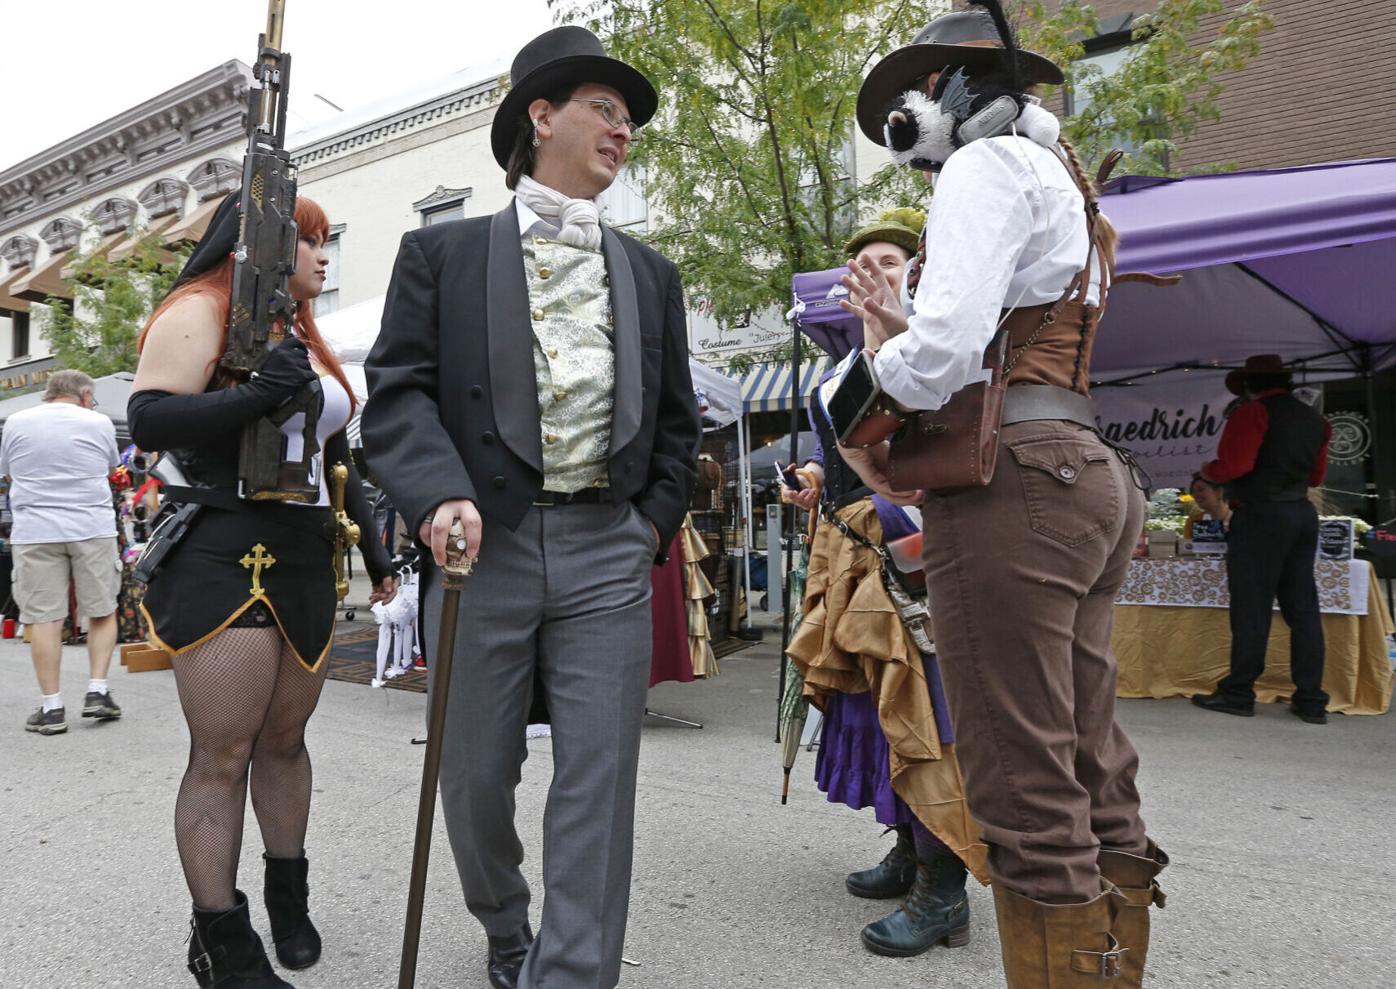 Steampunk Festival returns to Hannibal this weekend | Arts & Entertainment  